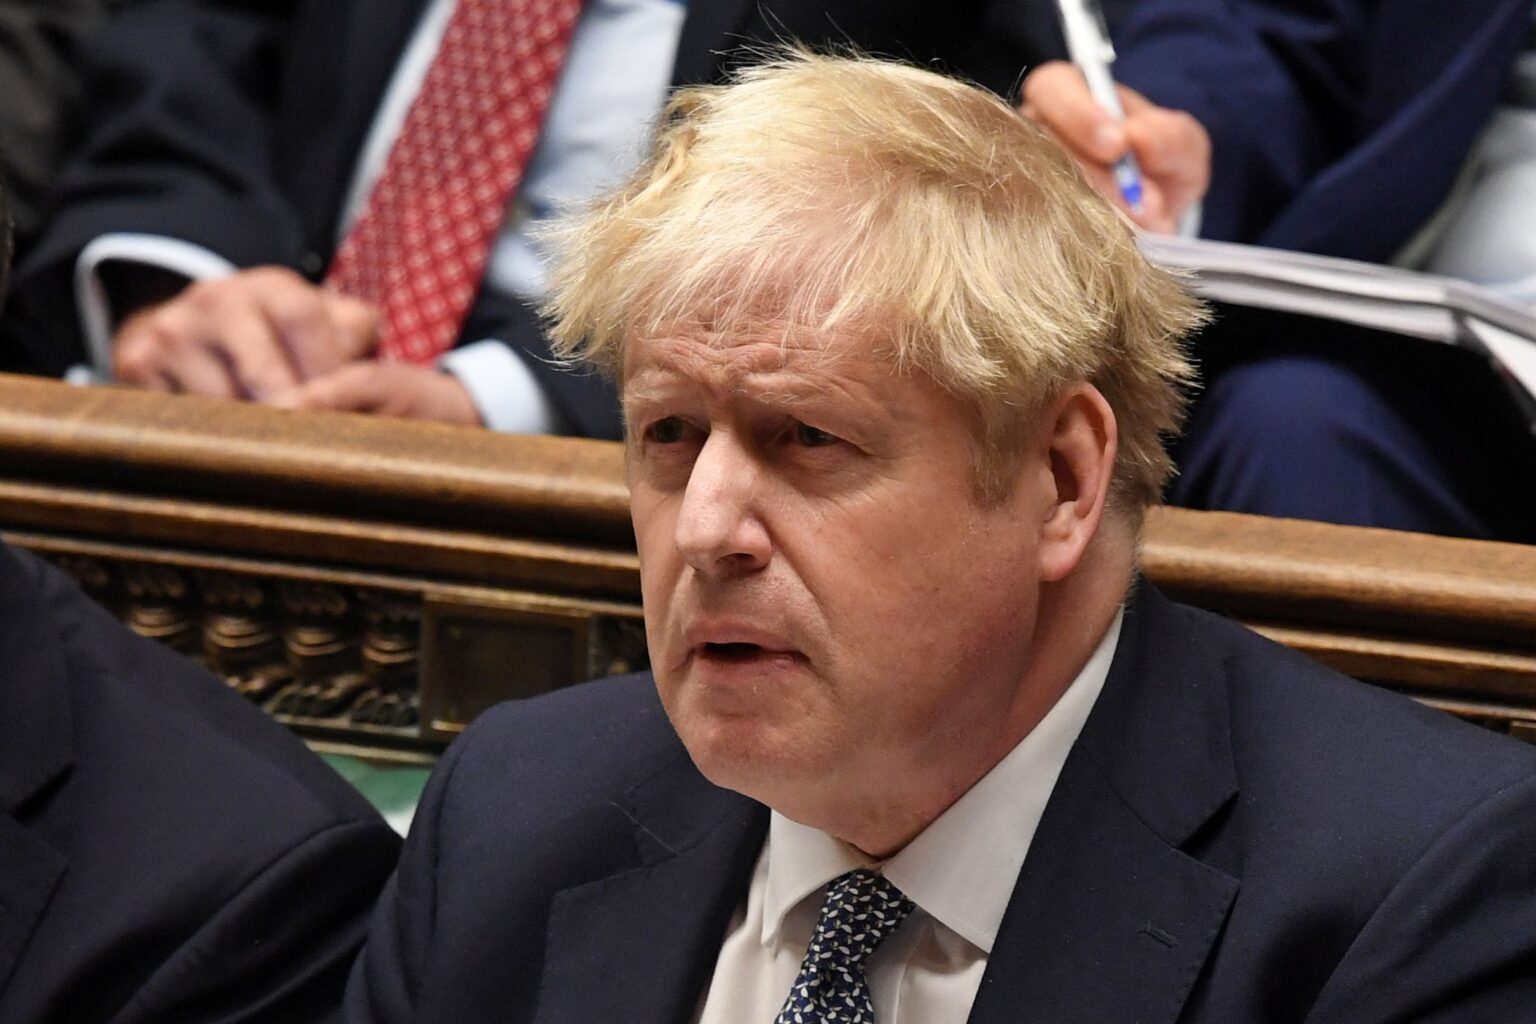 boris pmqs - WTX News Breaking News, fashion & Culture from around the World - Daily News Briefings -Finance, Business, Politics & Sports News